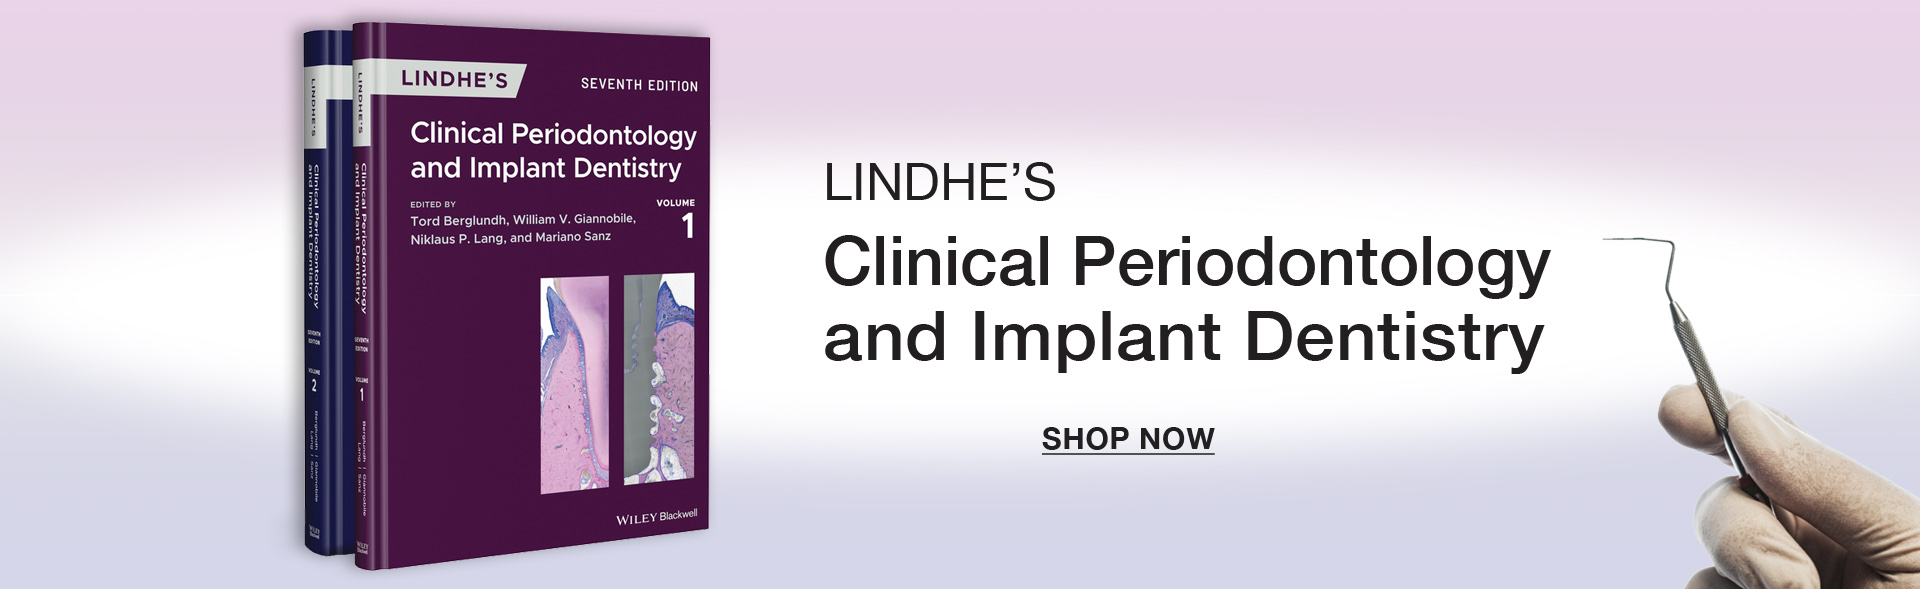 Lindhe's Clinical Periodontology